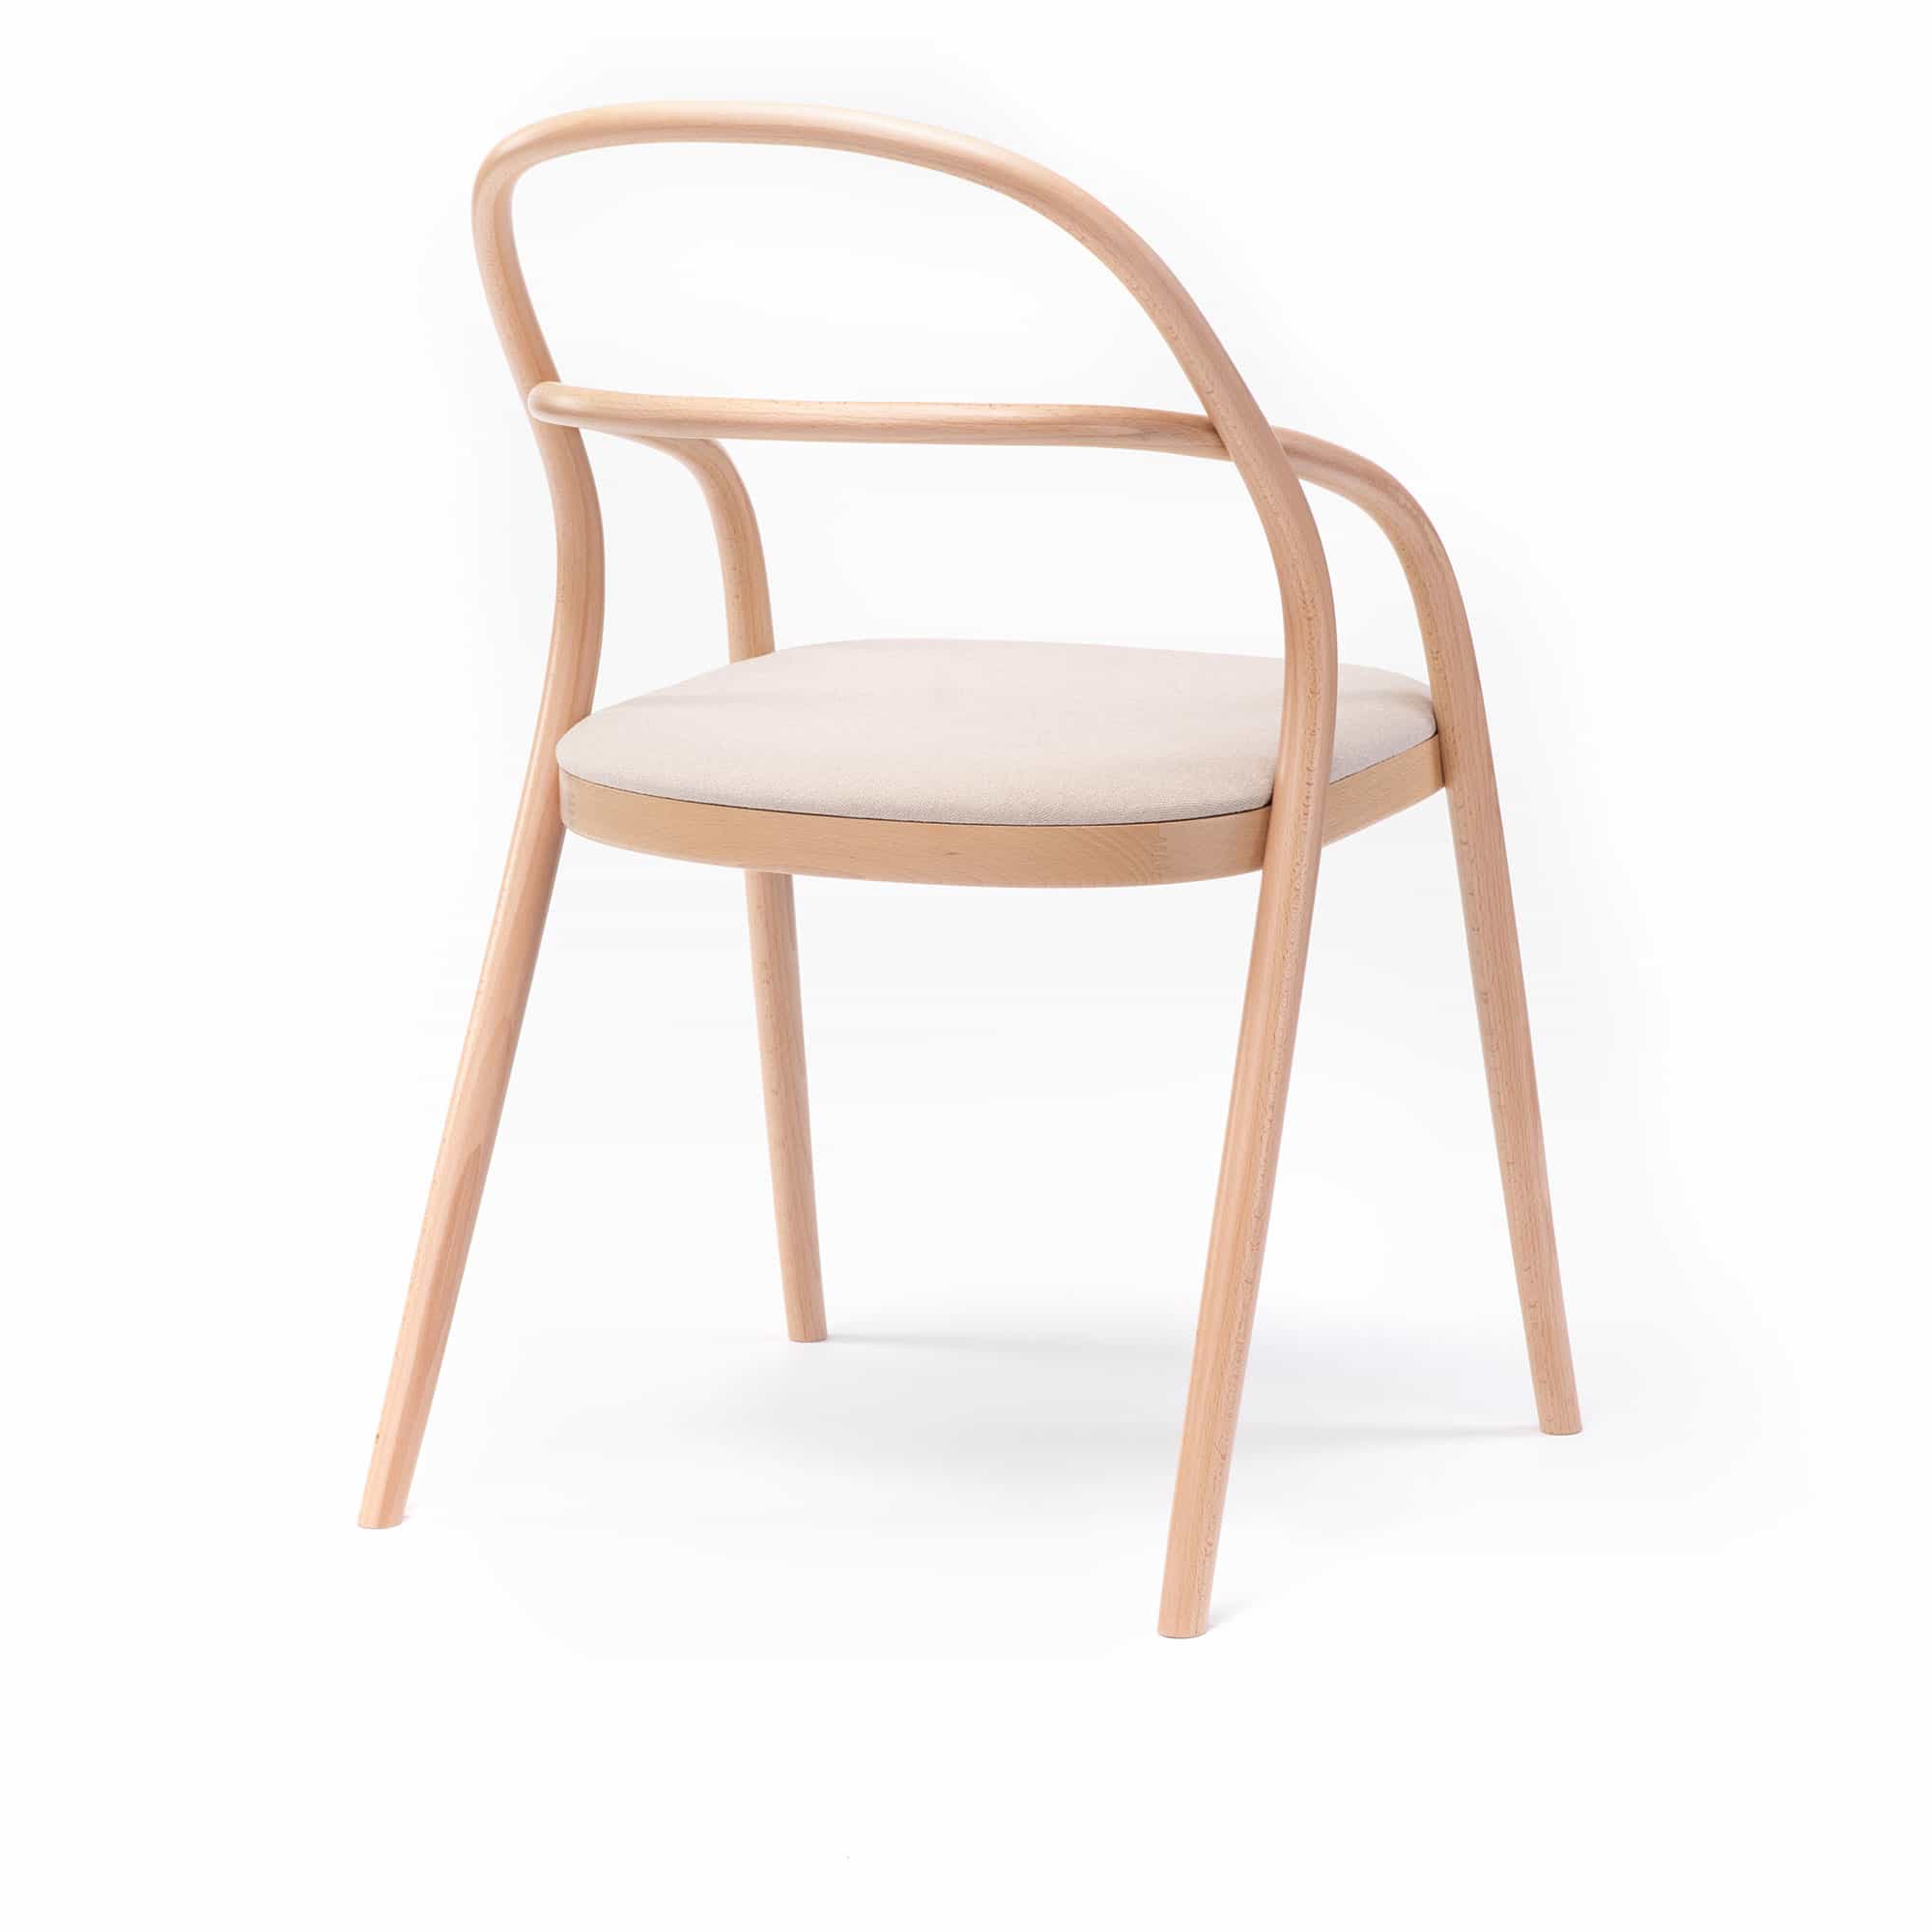 002 Chair Natural Beech Lacquered Jet Bioactive 9110